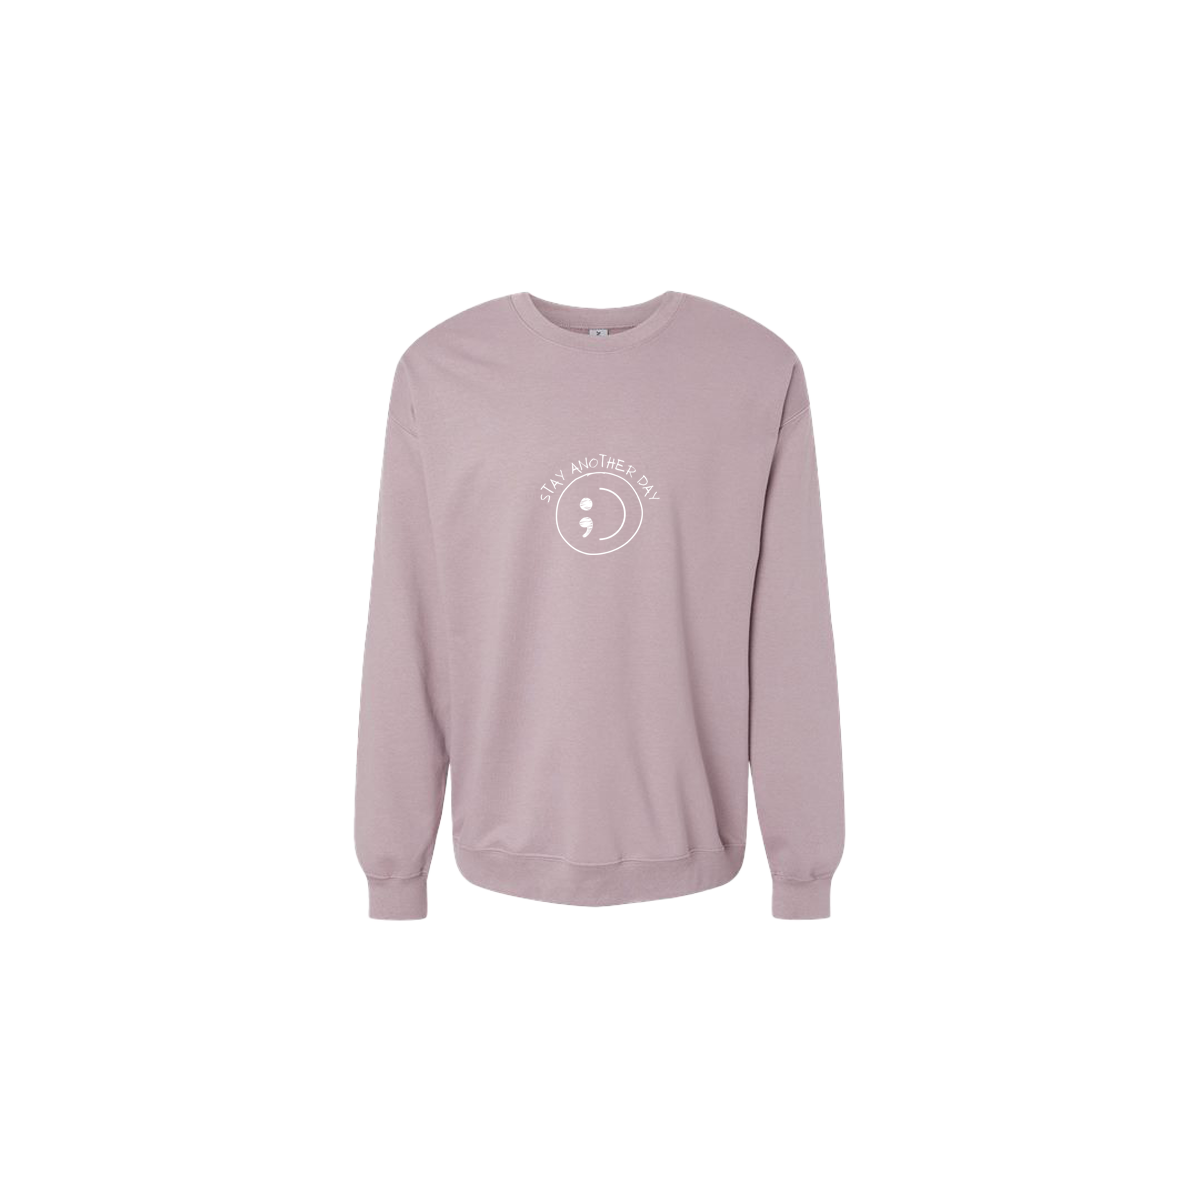 Stay Another Day Smiley Face Embroidered Mauve Crewneck - Mental Health Awareness Clothing